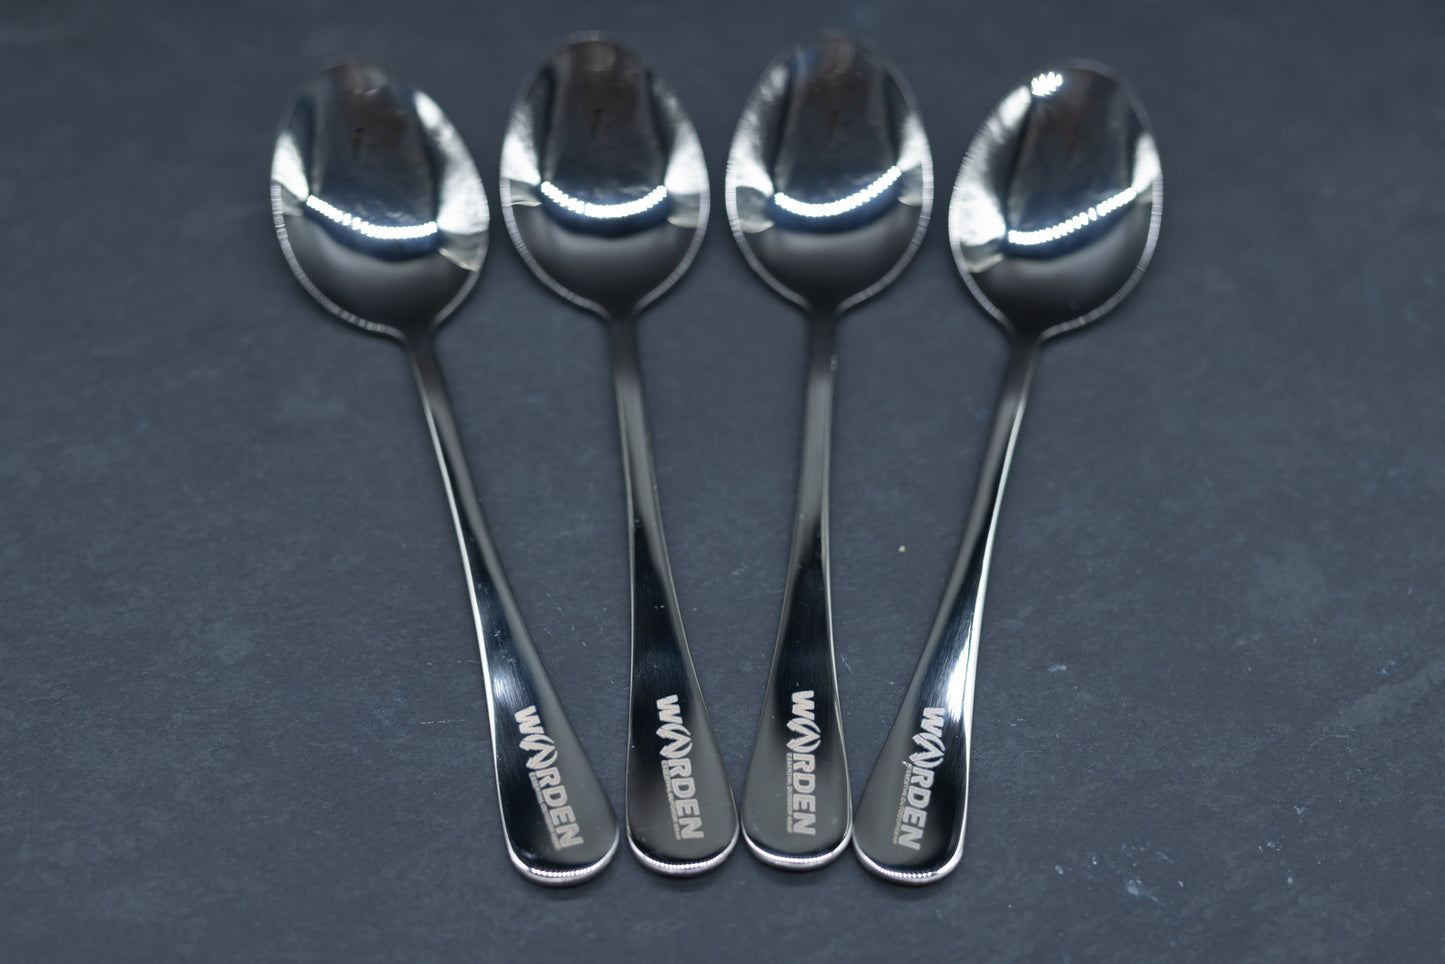 Stainless Steel Spoon set (x4)